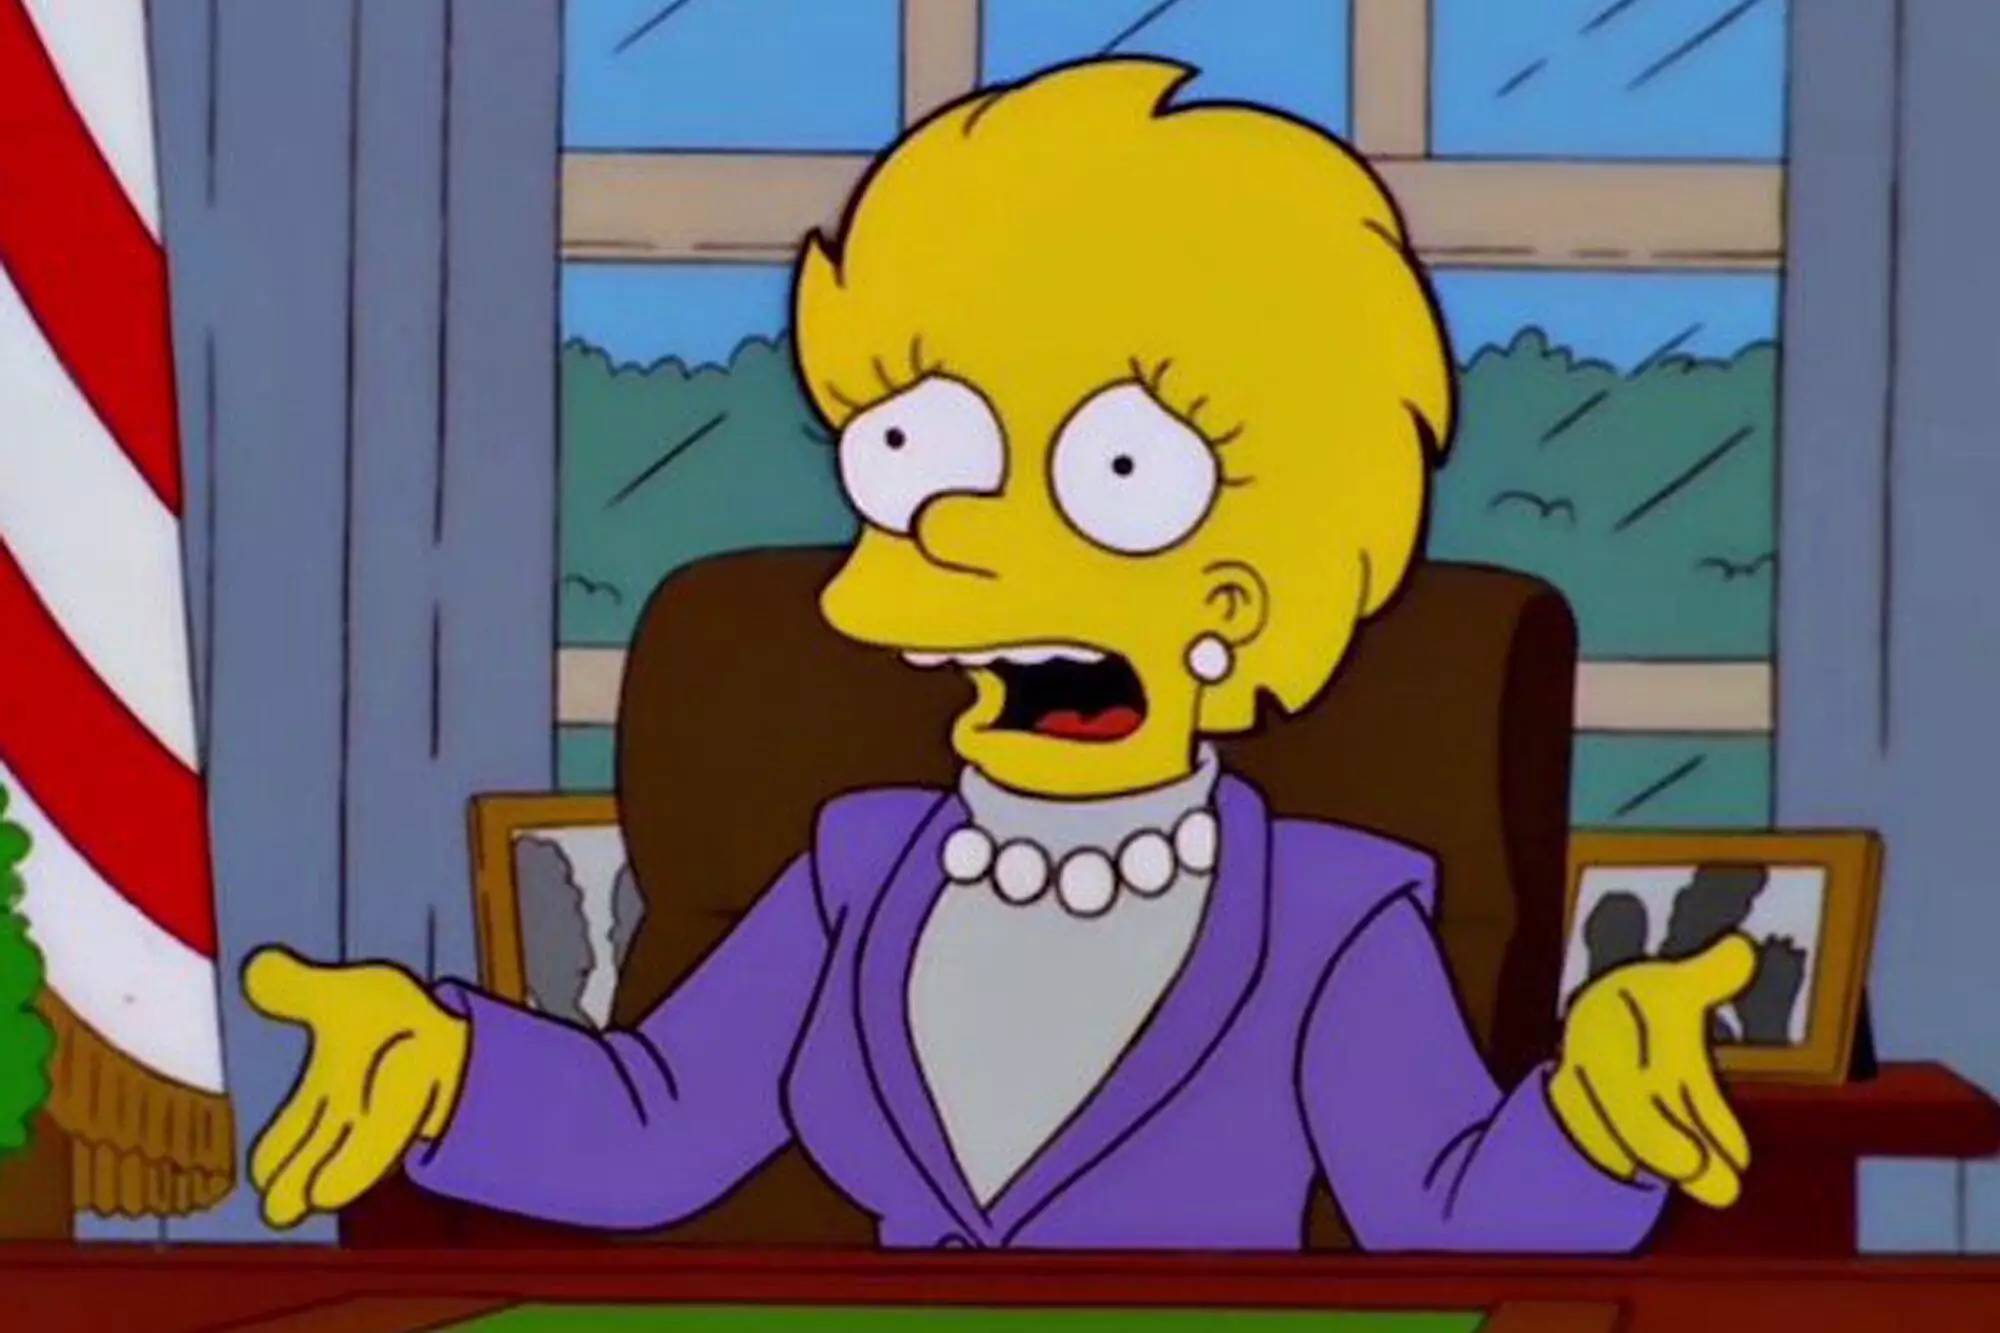 Lisa Simpson becomes the first female President in The Simpsons (